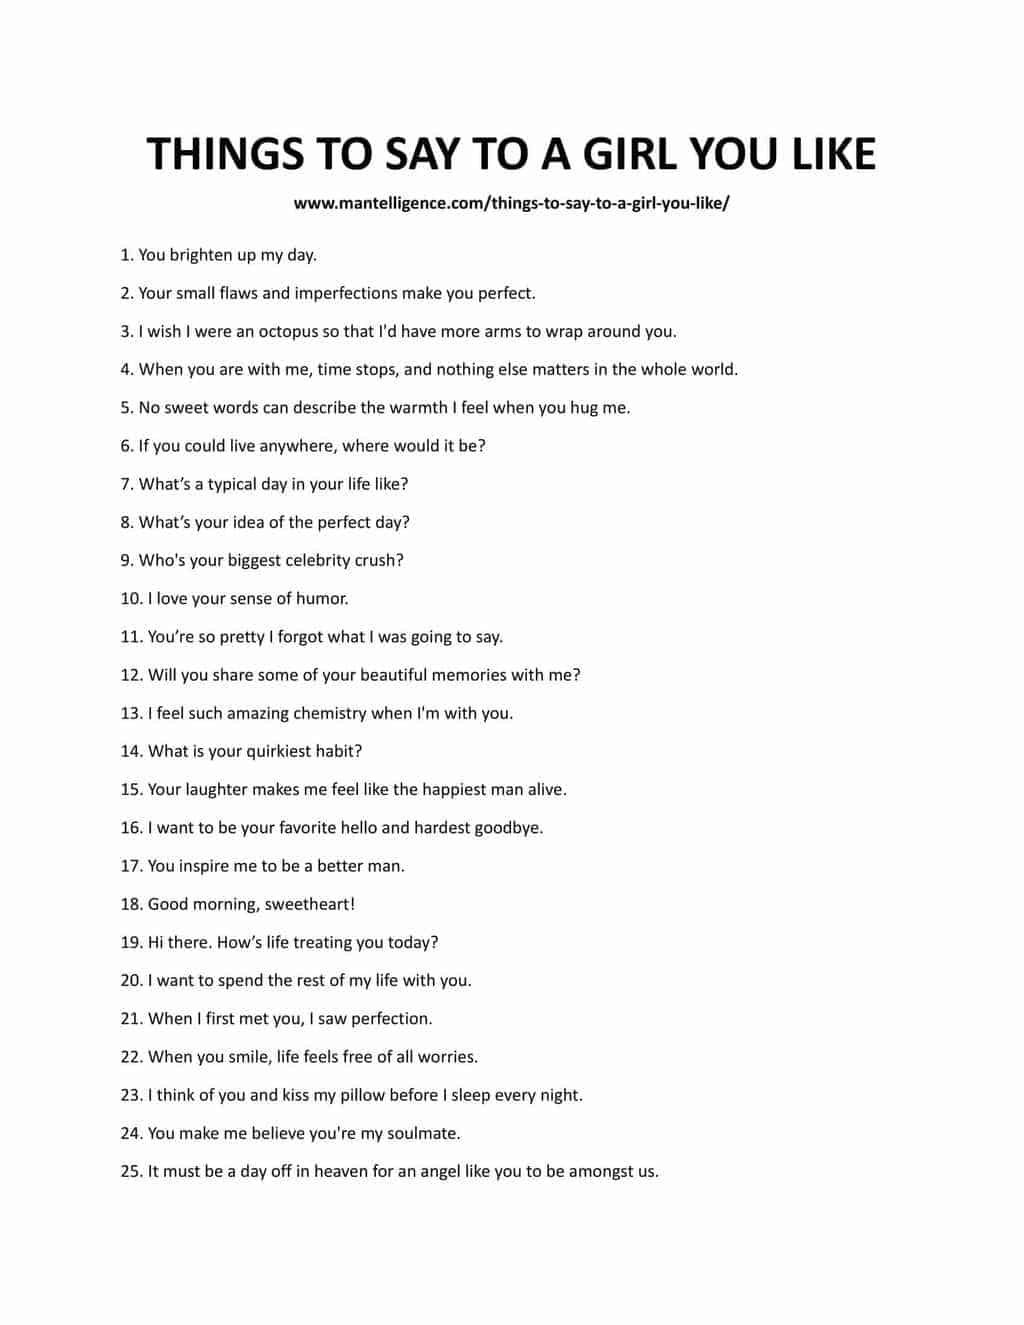 Things to tell a woman you love